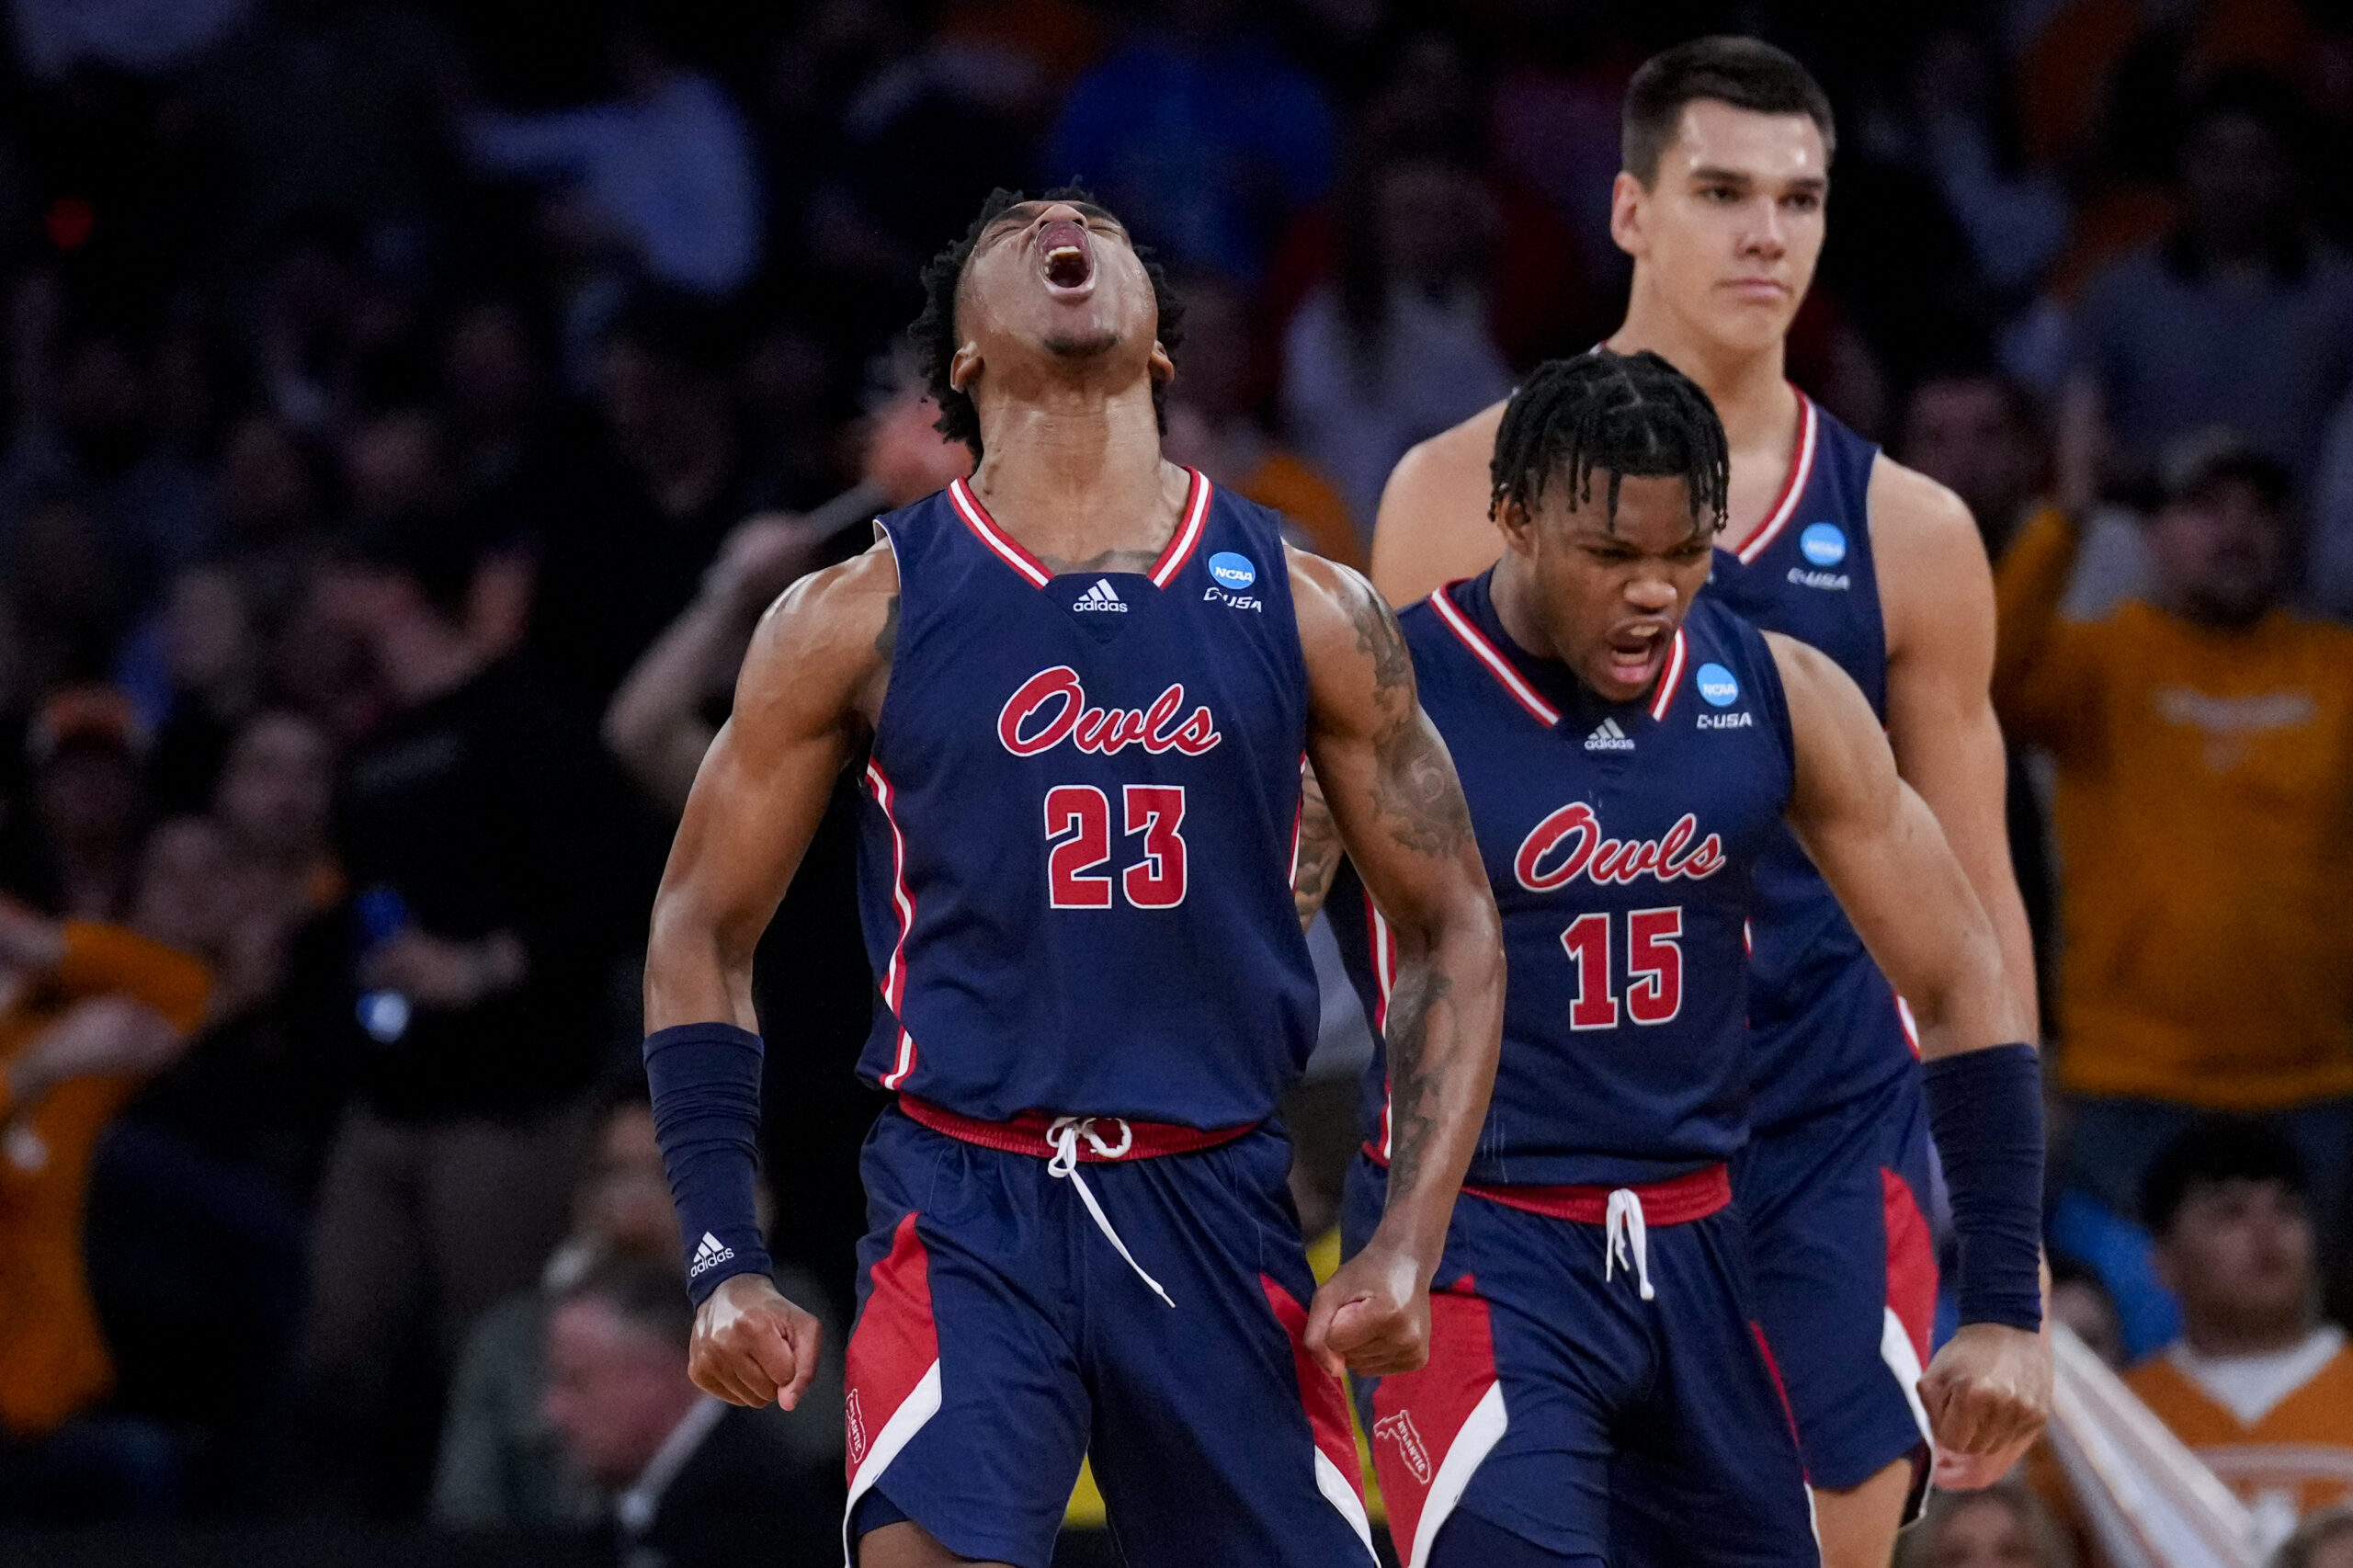 The Owls do it again! FAU, KT Harrell heading to Elite Eight after upset of Tennessee